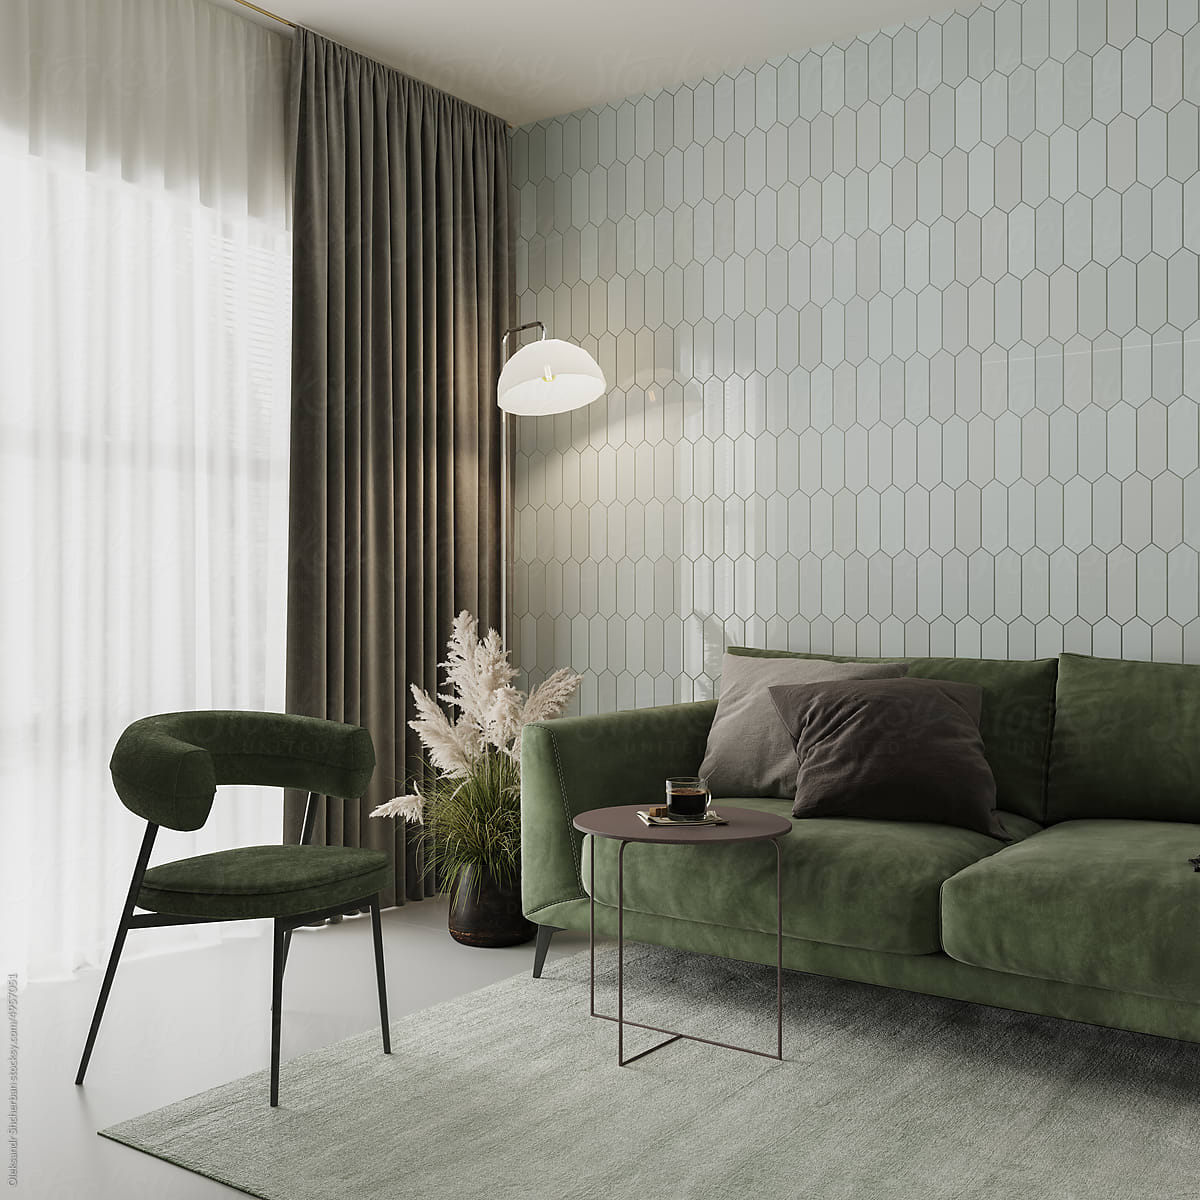 Living room interior with dark green sofa and armchair, tiled wall